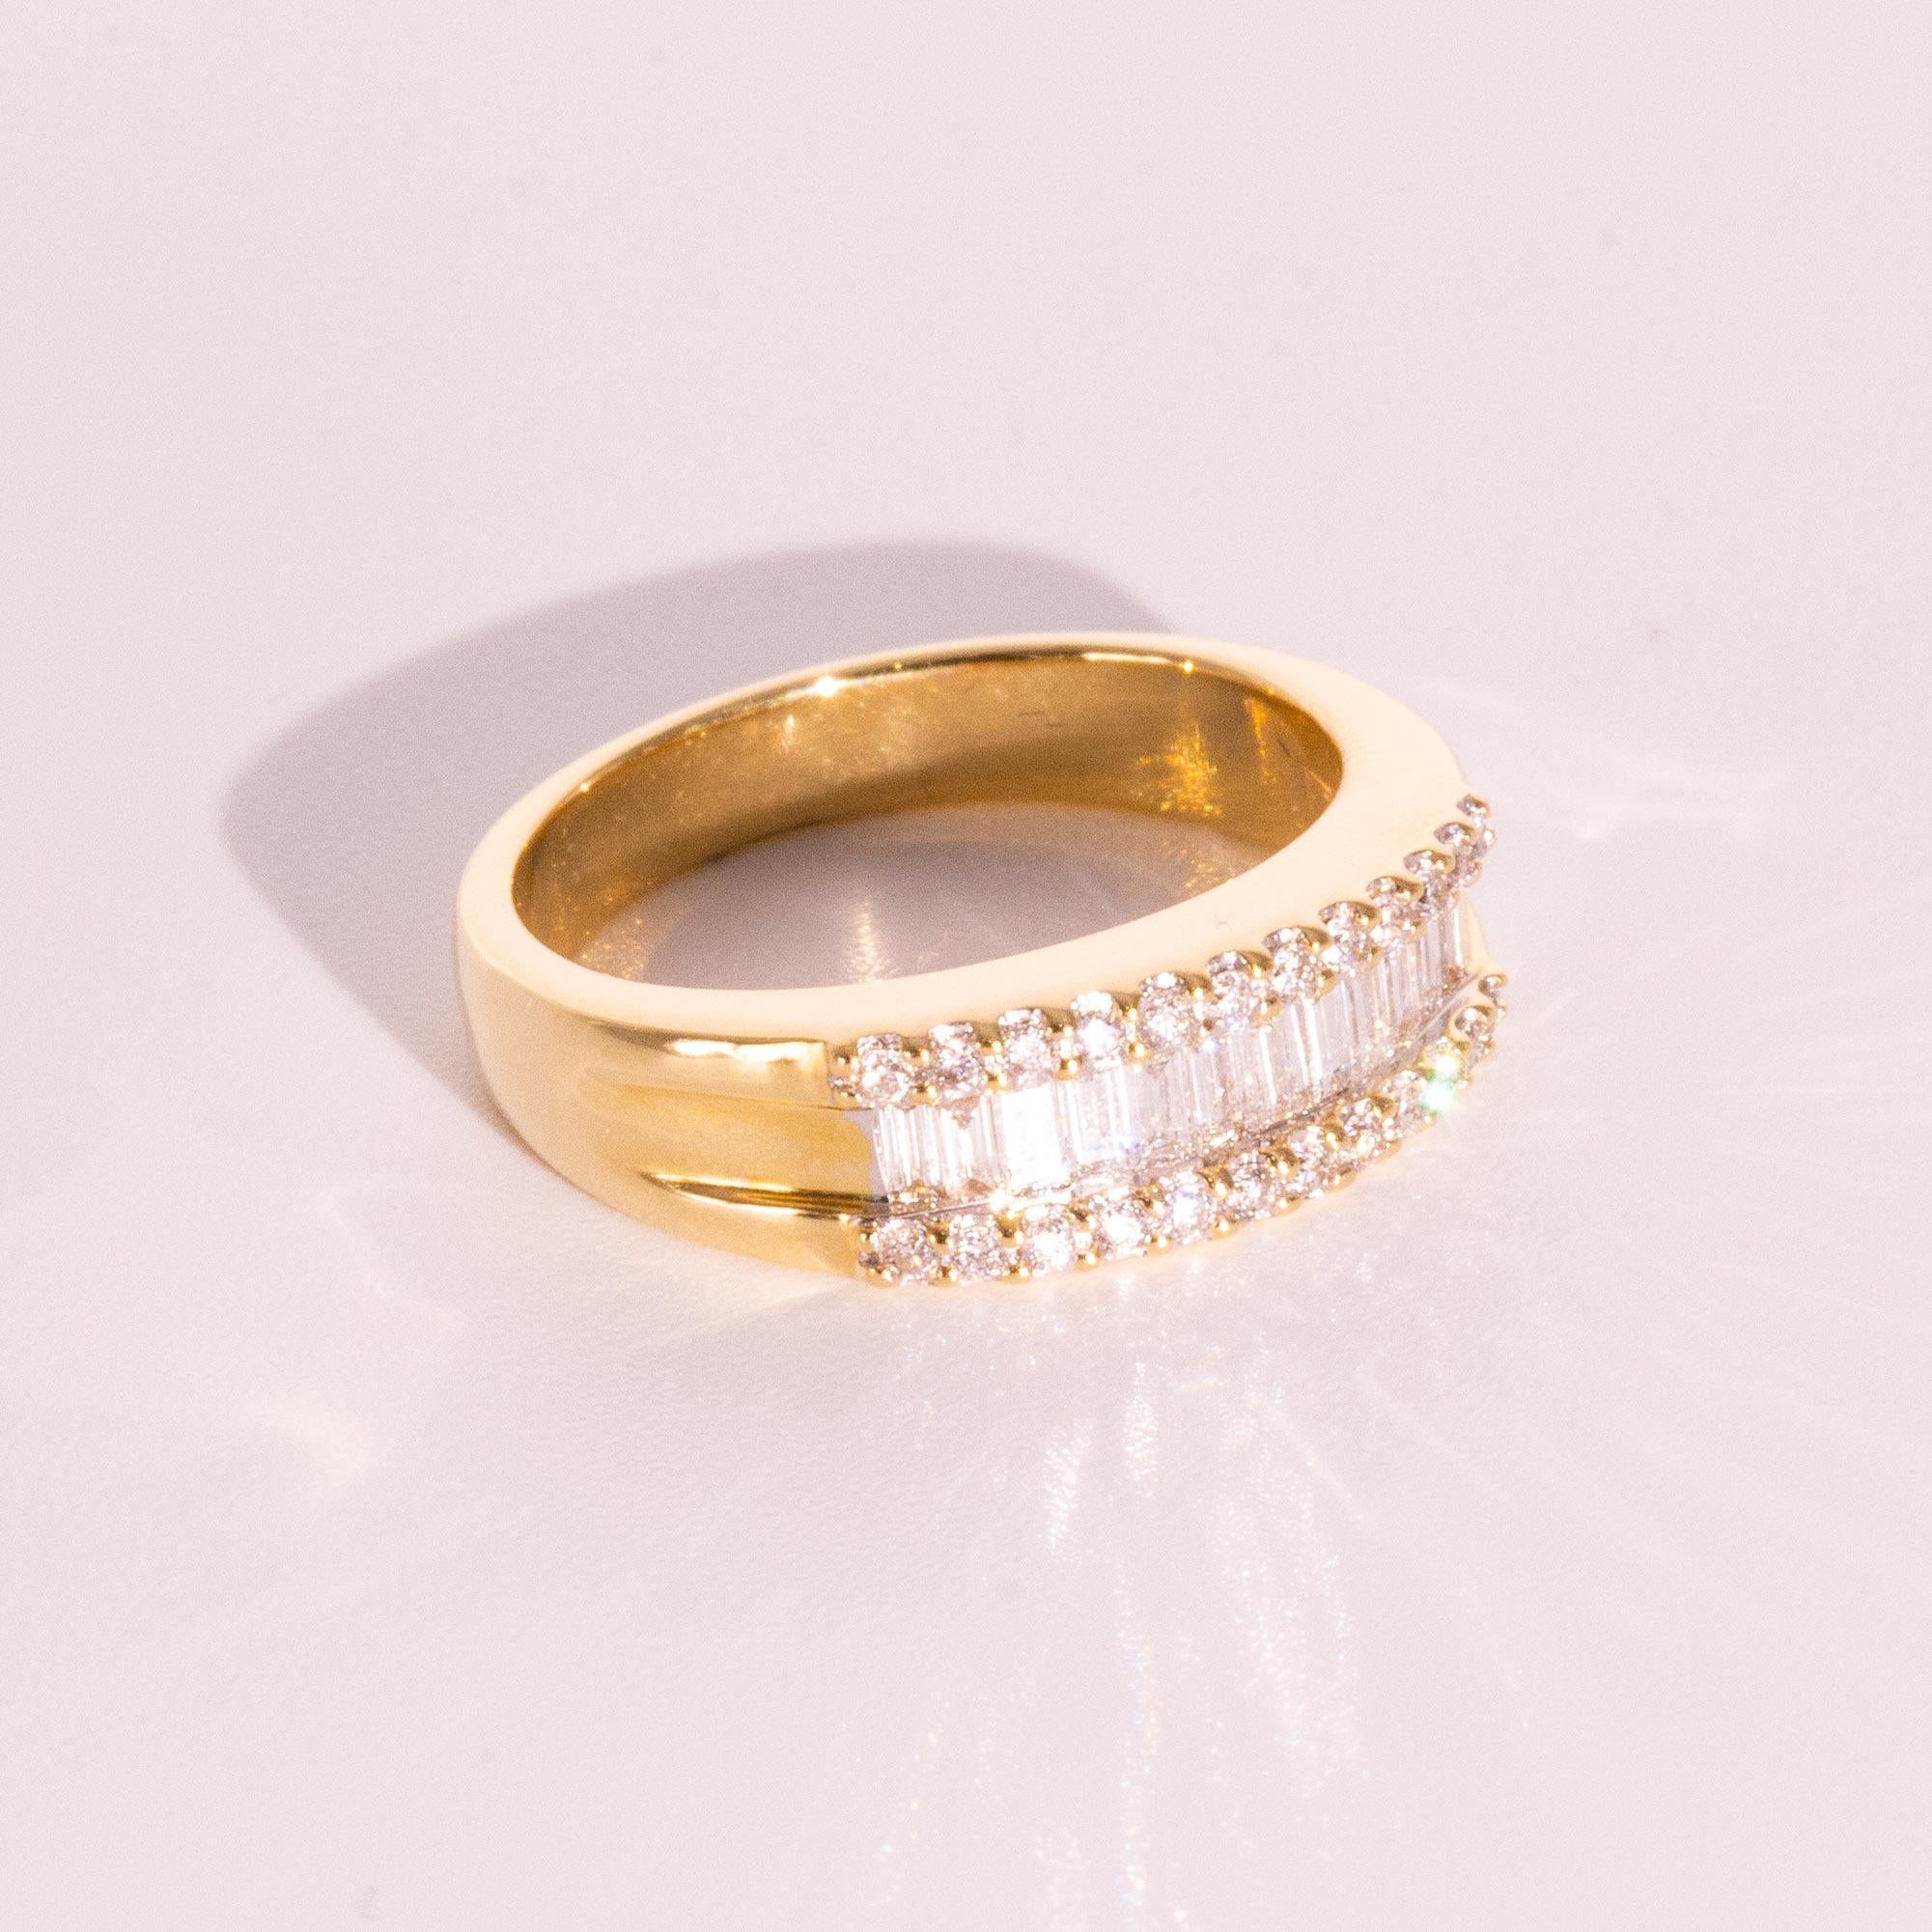 Forged in 18 carat yellow gold is this darling ring carefully set with round brilliant cut and baguette cut diamonds. We have named this charming ring The Marilla Ring. The Marilla Ring sits comfortably low to the finger which makes her the perfect